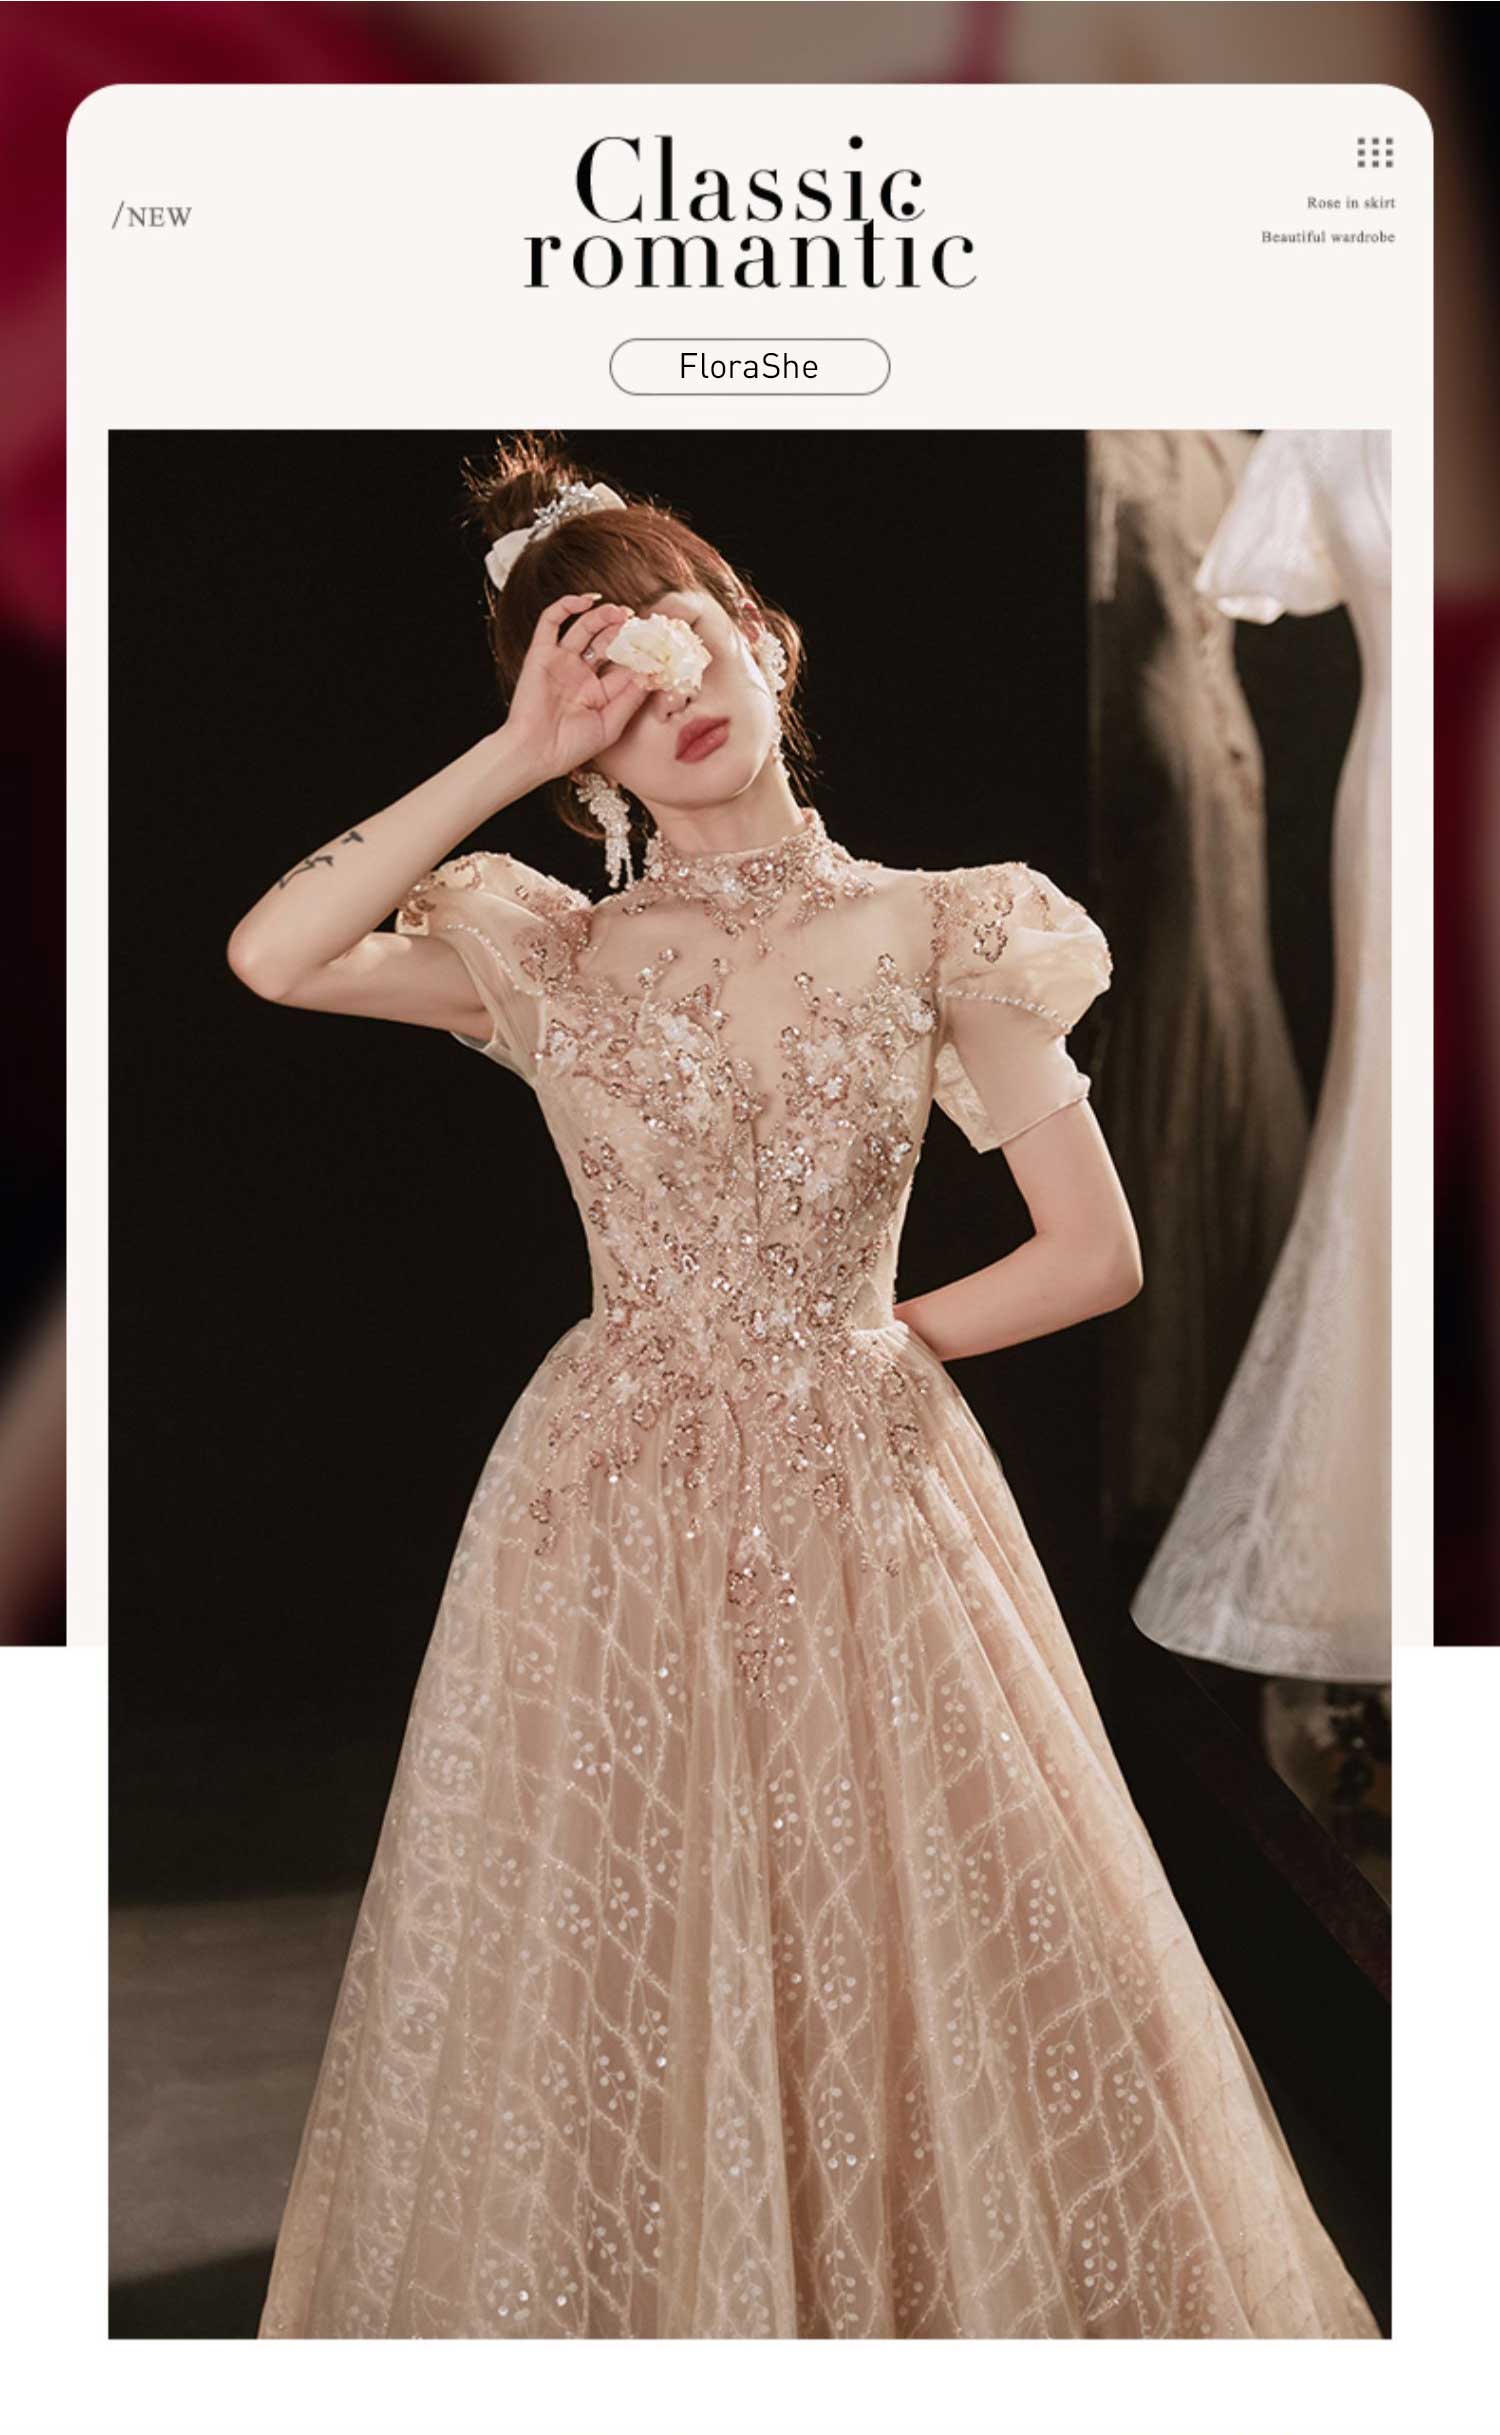 Luxury-Vintage-Cocktail-Party-Prom-Dress-Ball-Gown-Formal-Attire11